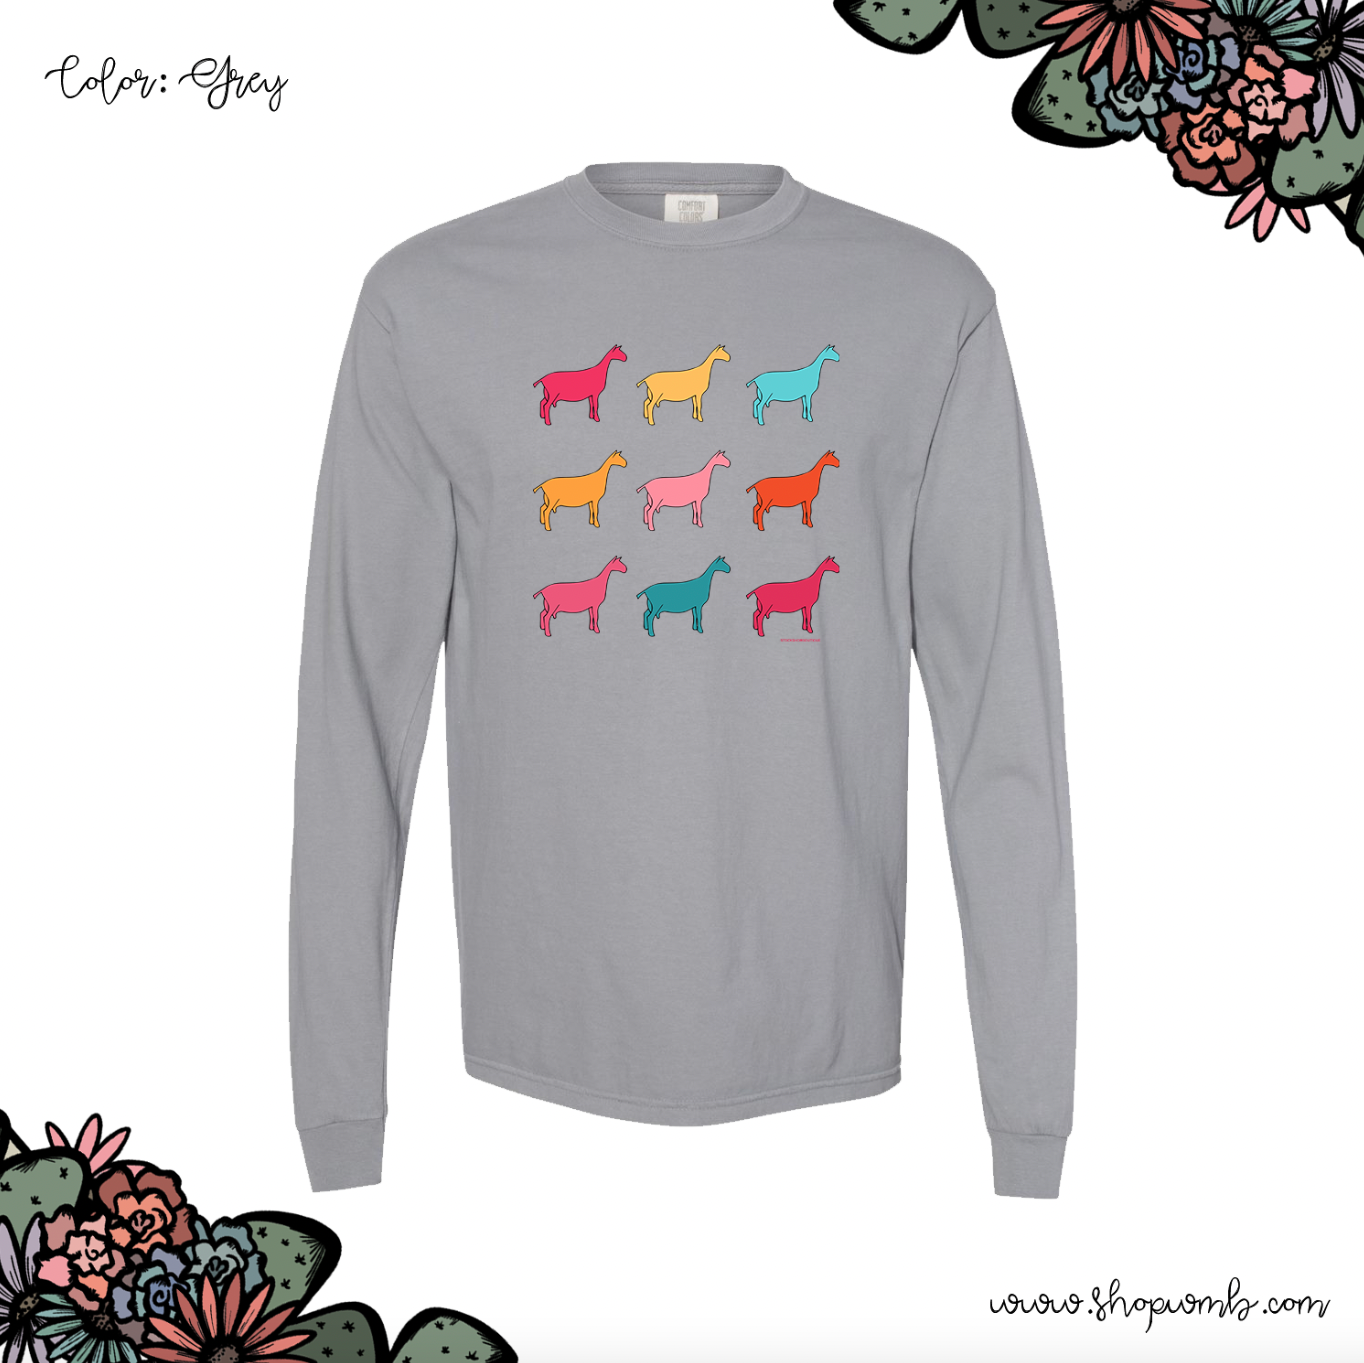 Colorful Dairy Goats LONG SLEEVE T-Shirt (S-3XL) - Multiple Colors!